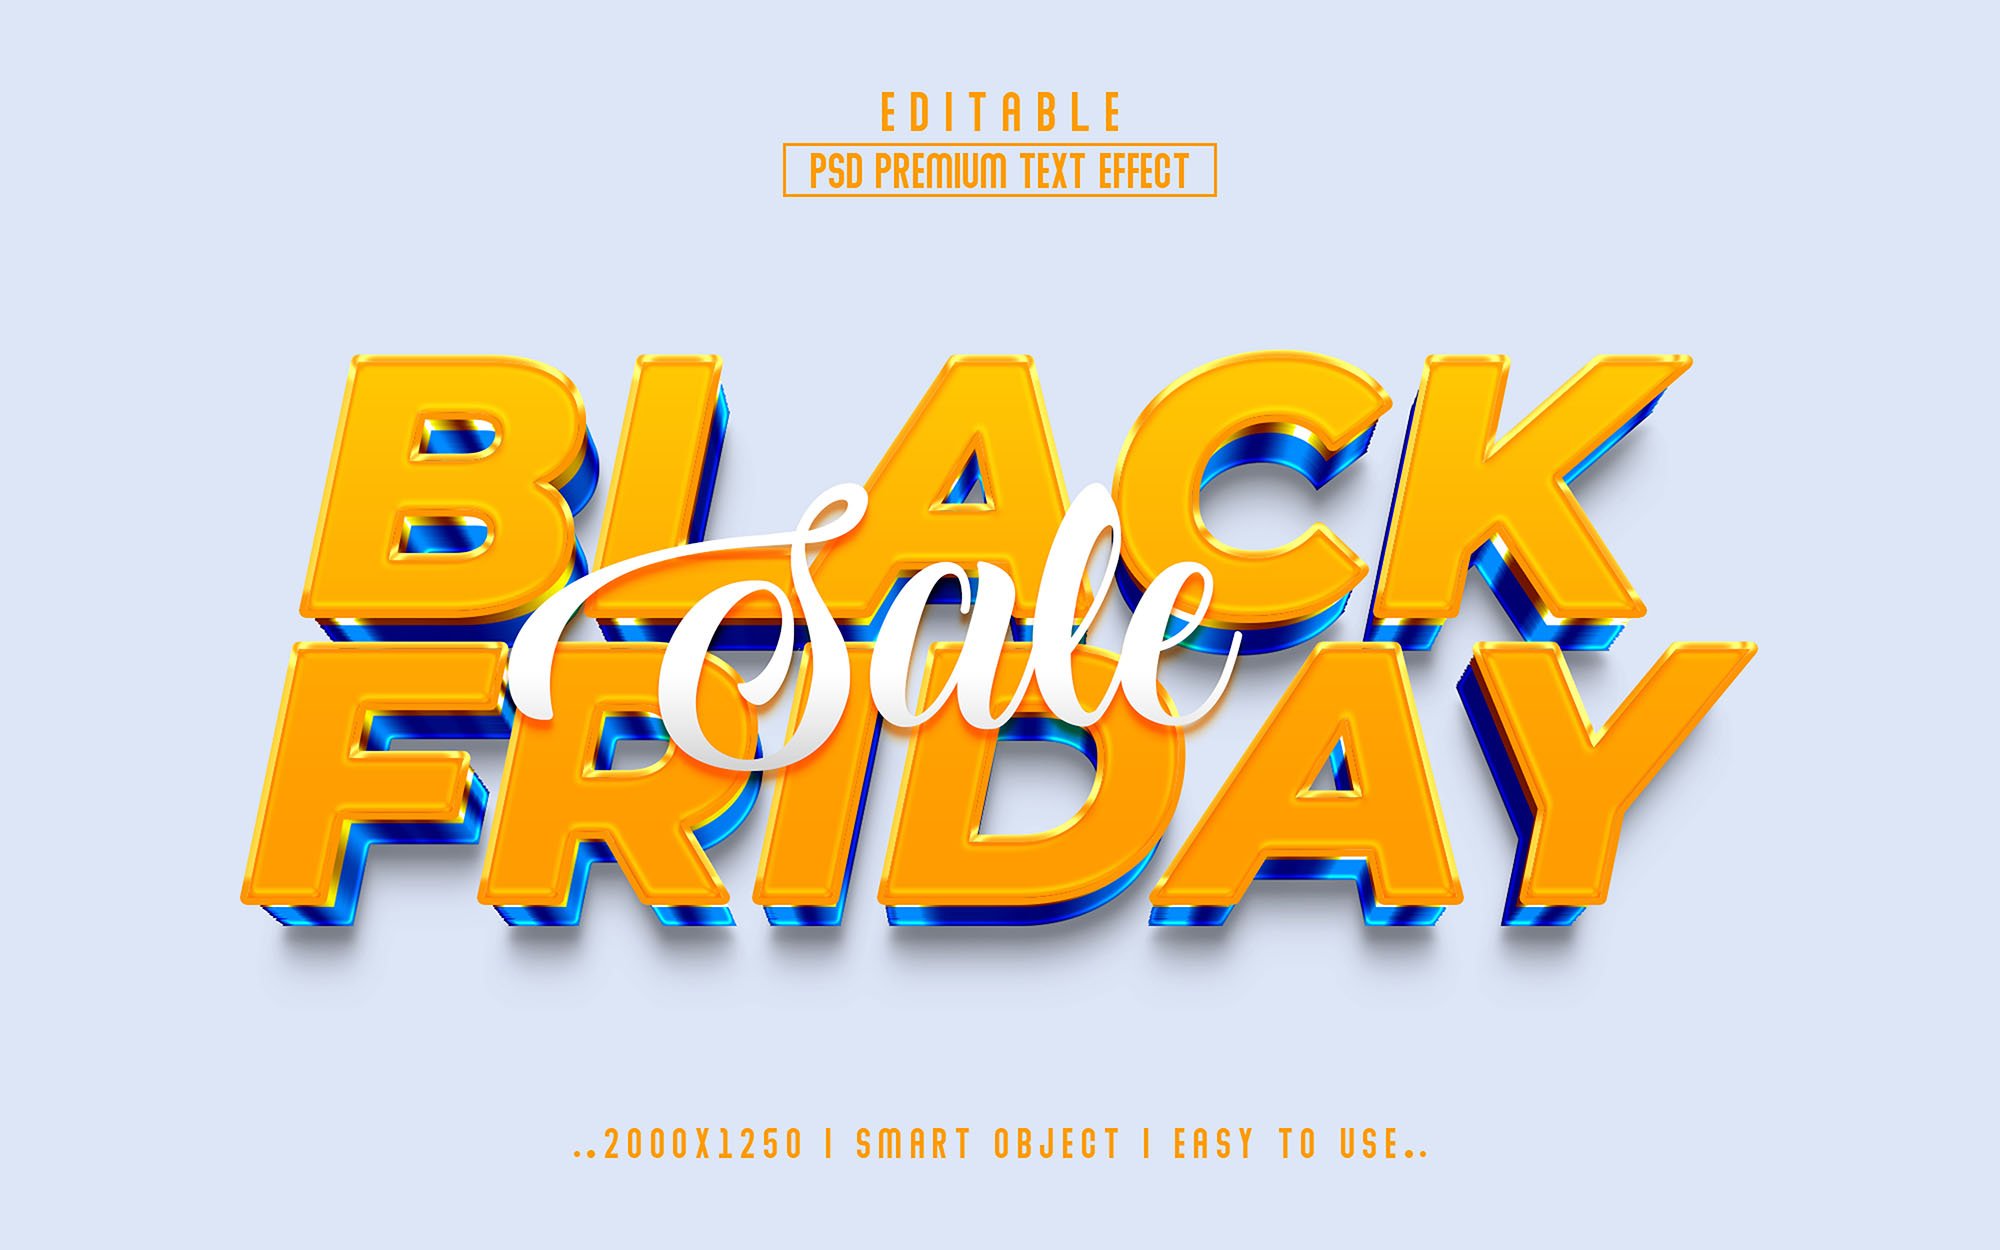 Black Friday sale 3D Text Effect psdcover image.